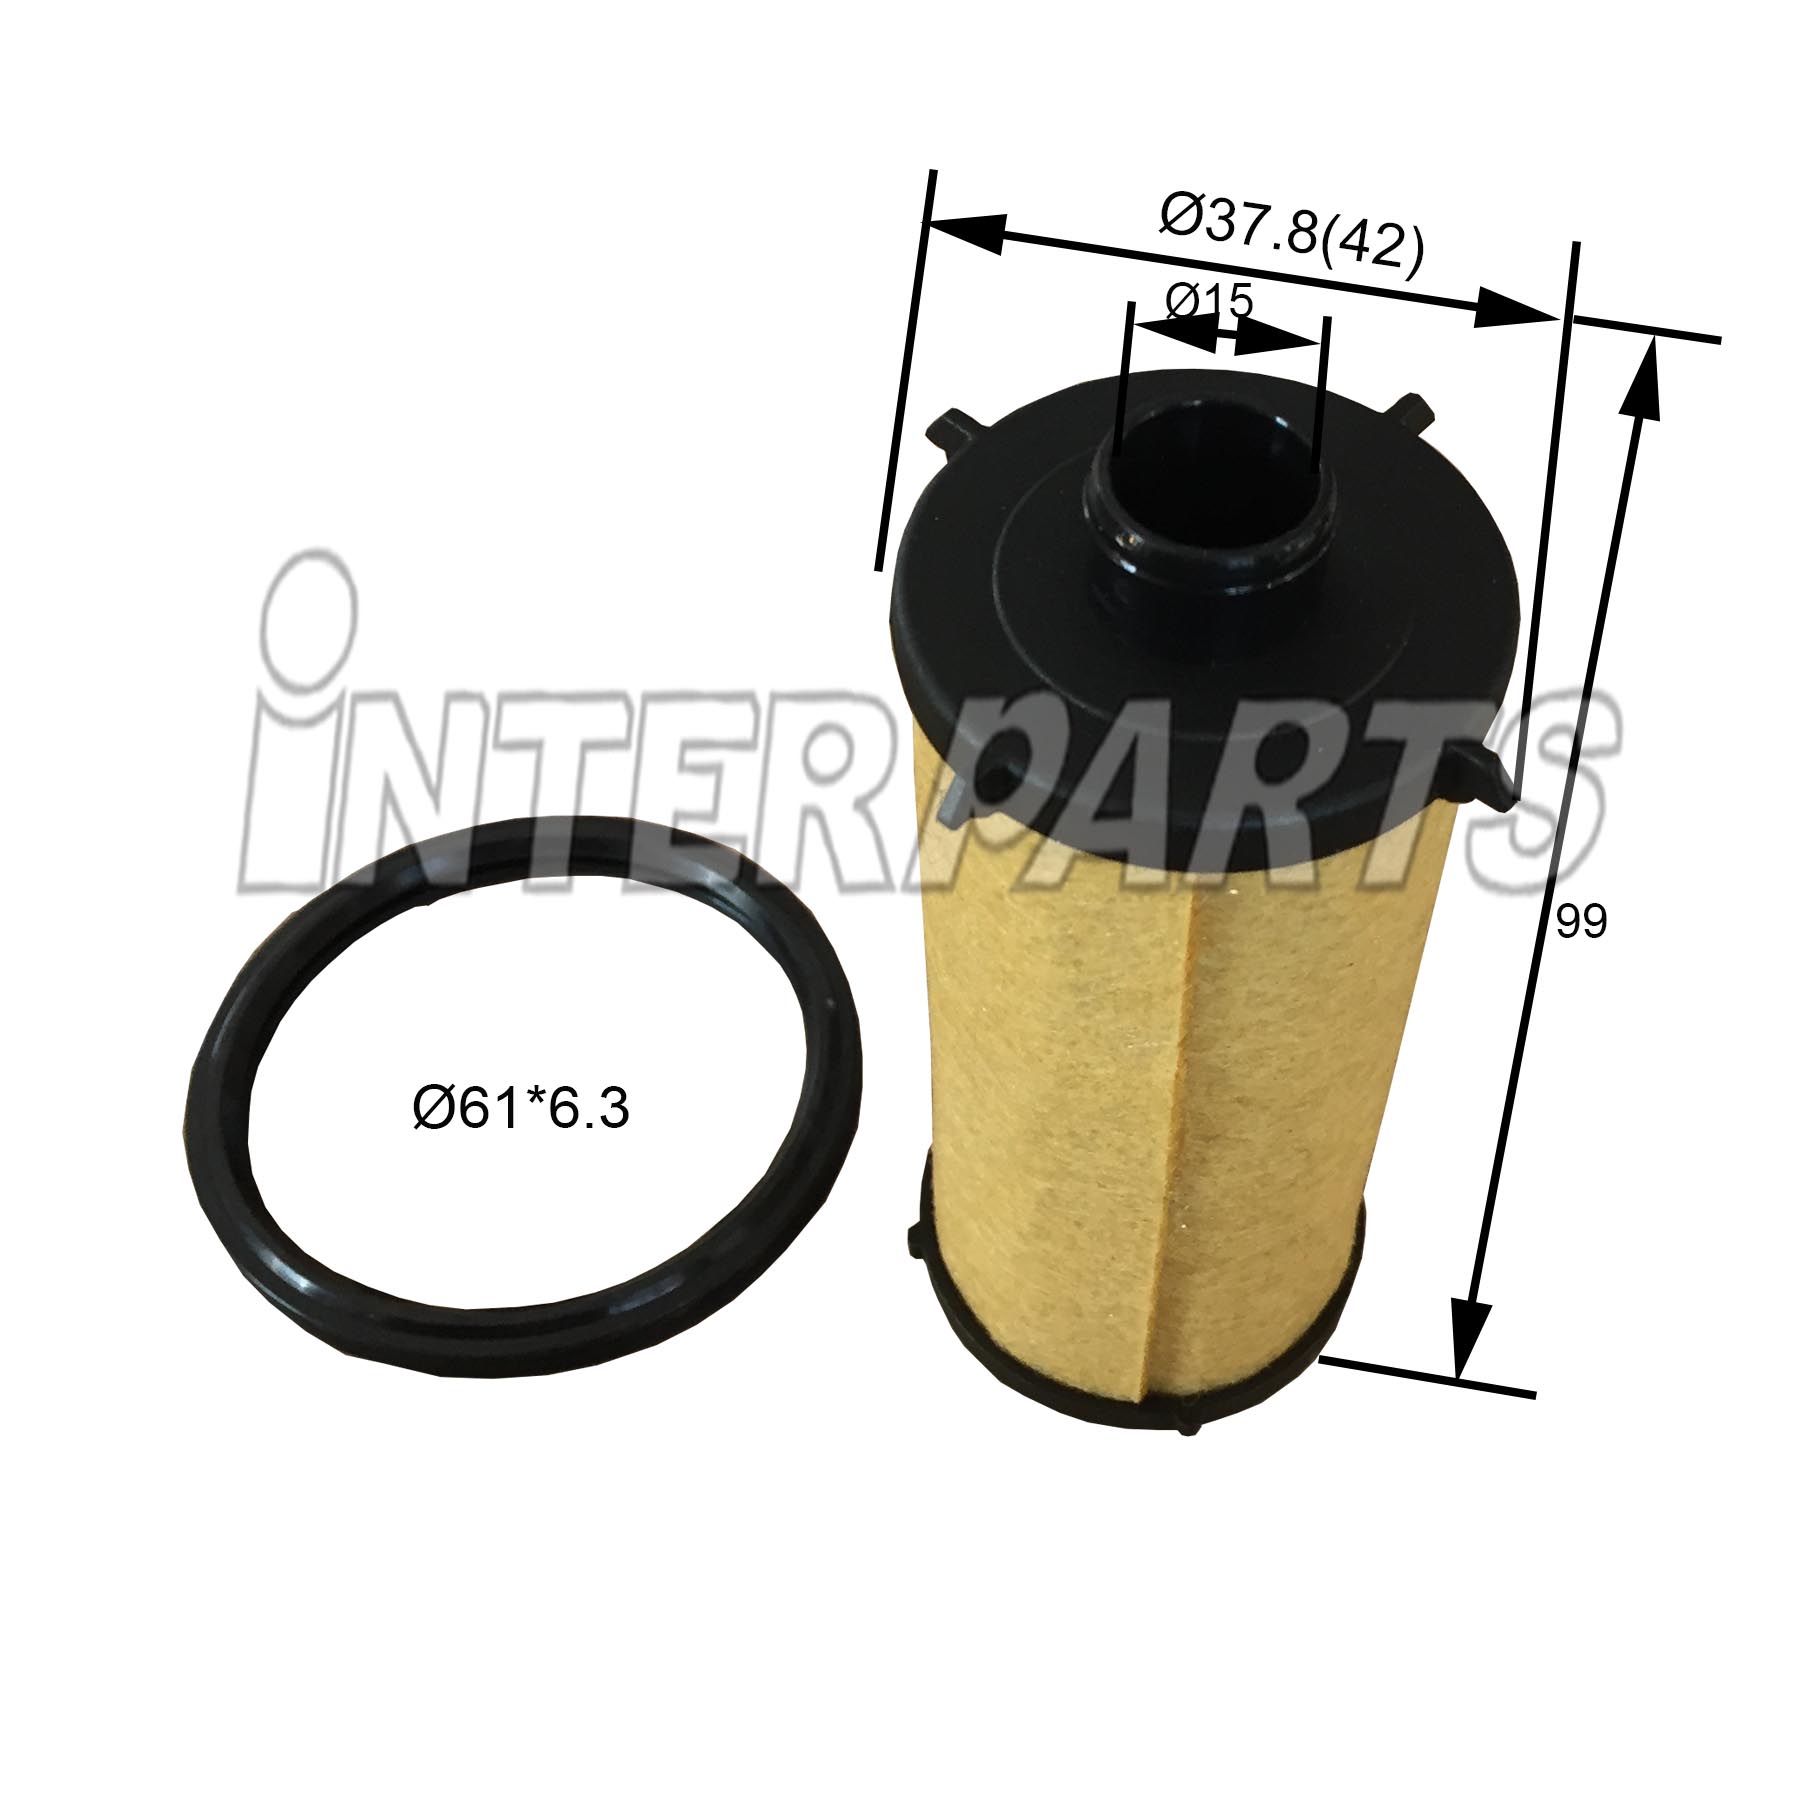 MERCEDES BENZ 호환 TRANSMISSION FILTER A2463770495 IPTS-E168AS